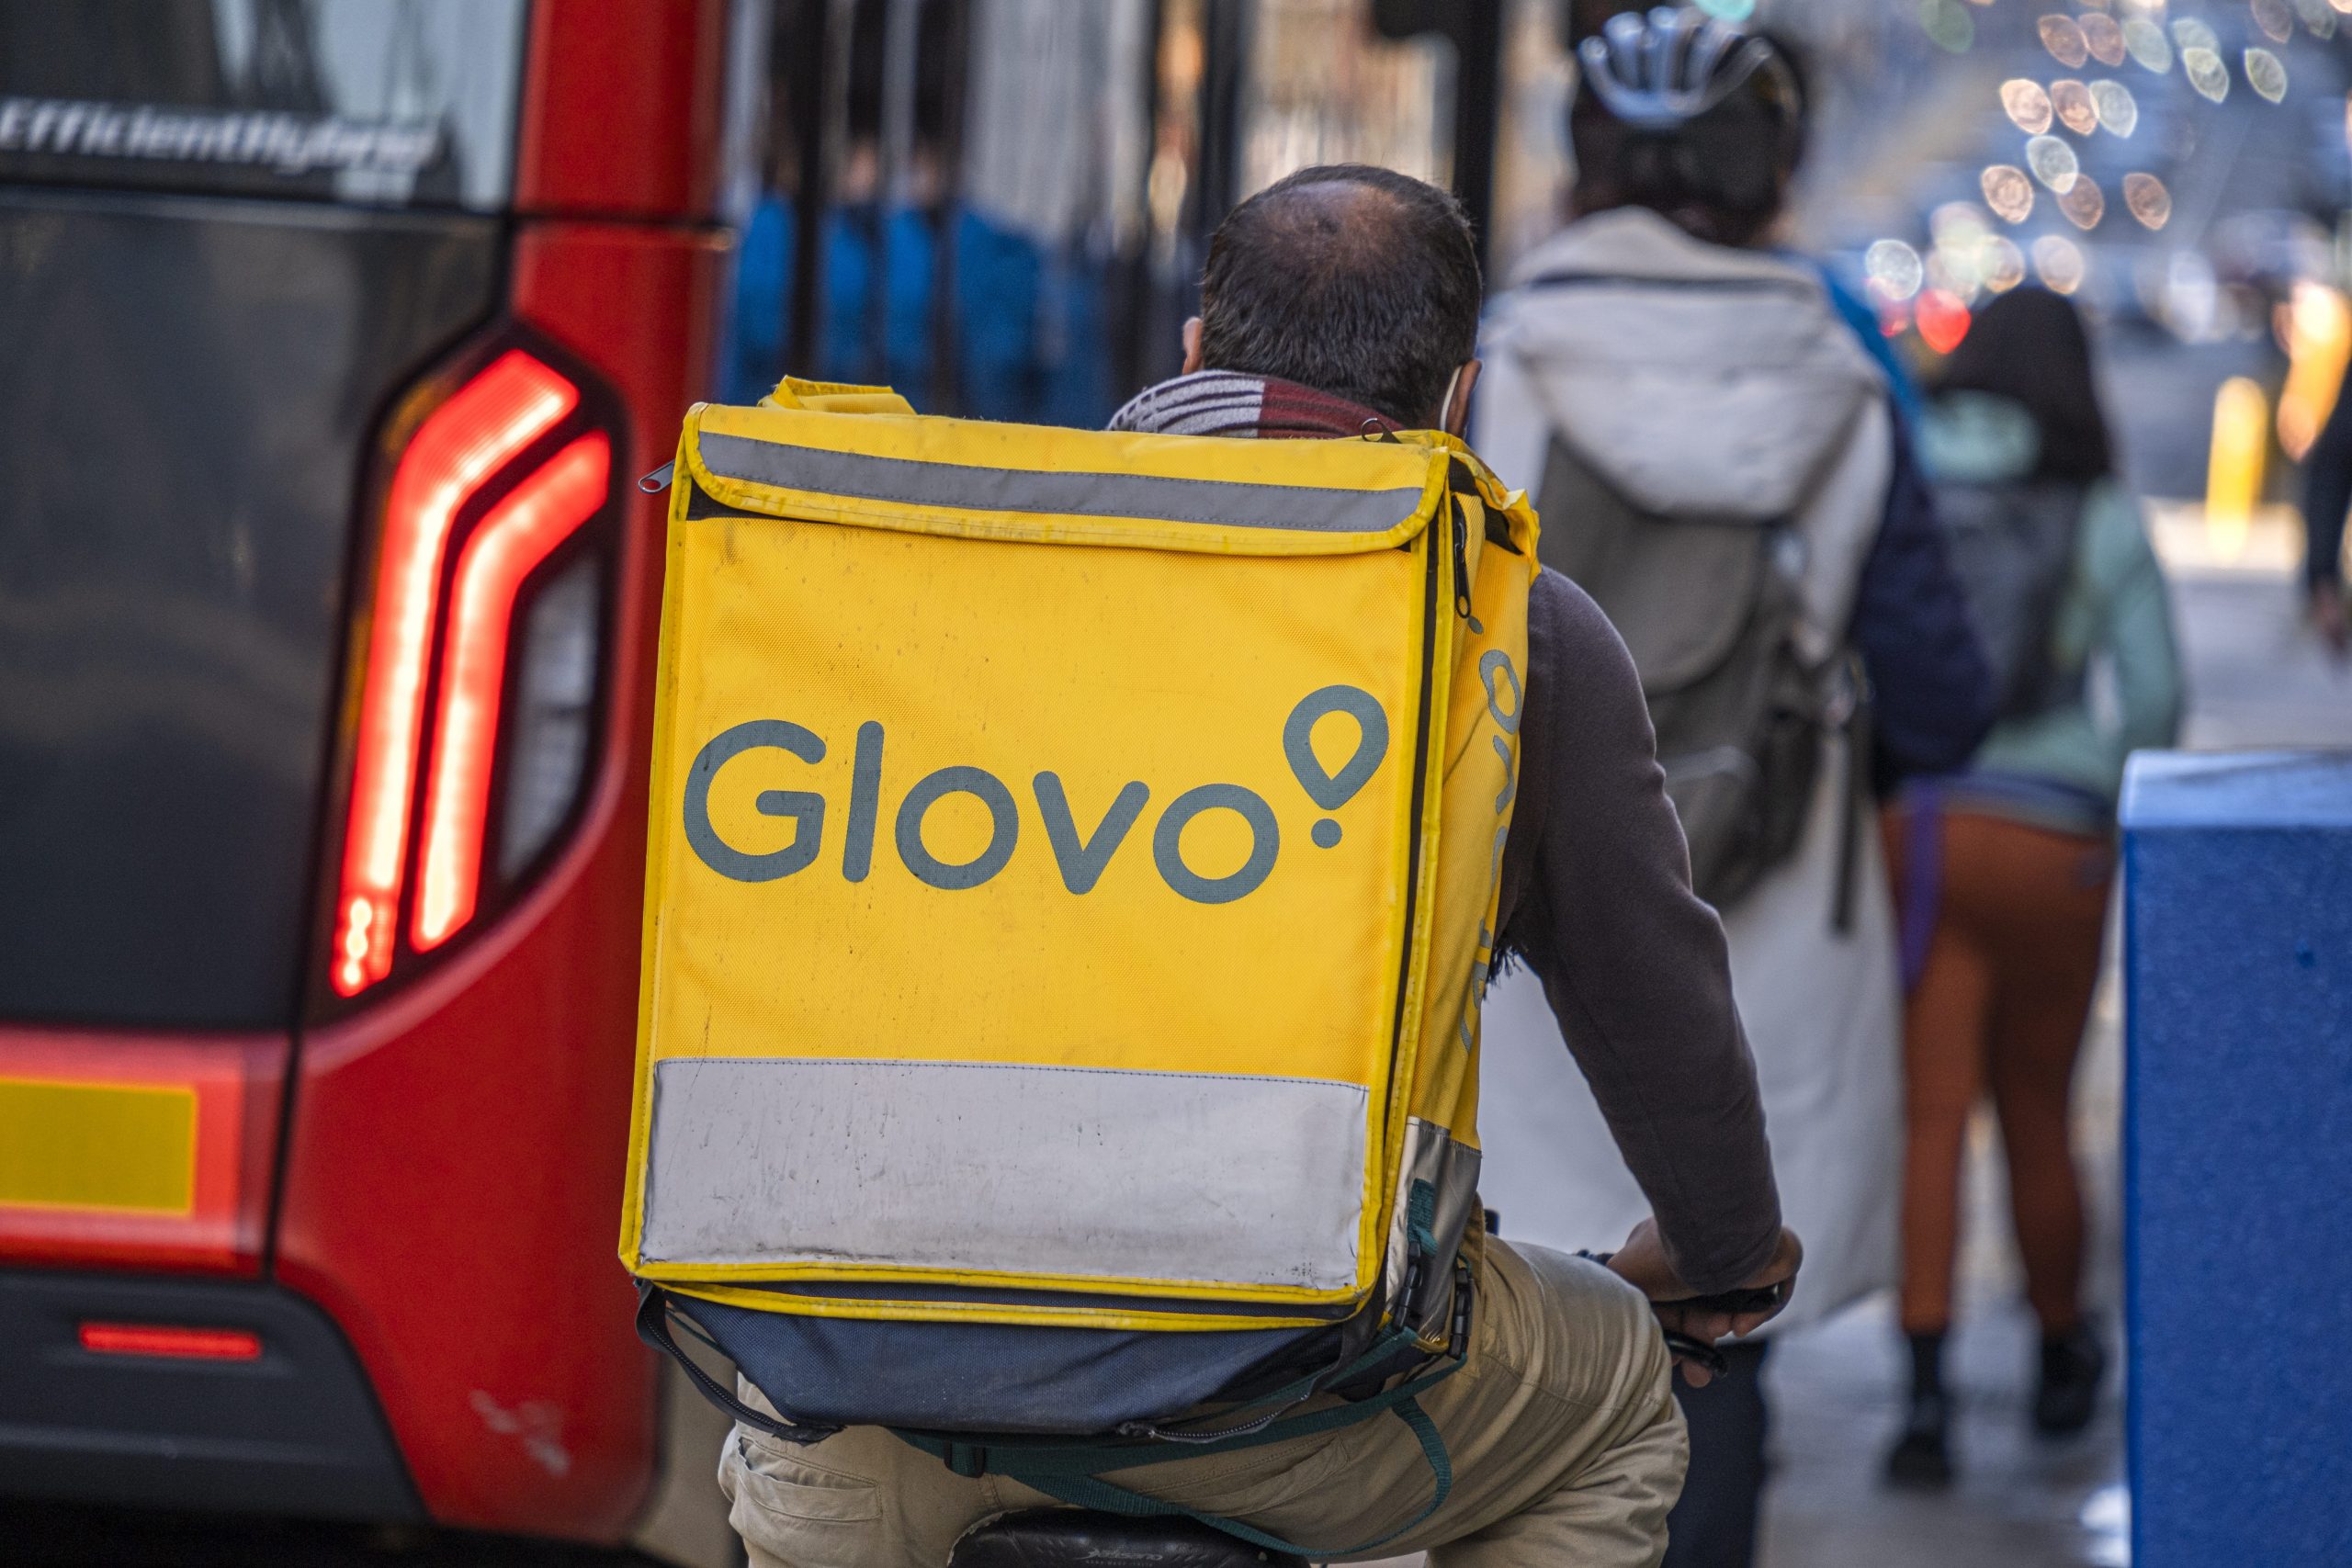 Home delivery company Glovo fined €56.7 million for breaking Spain's employment laws